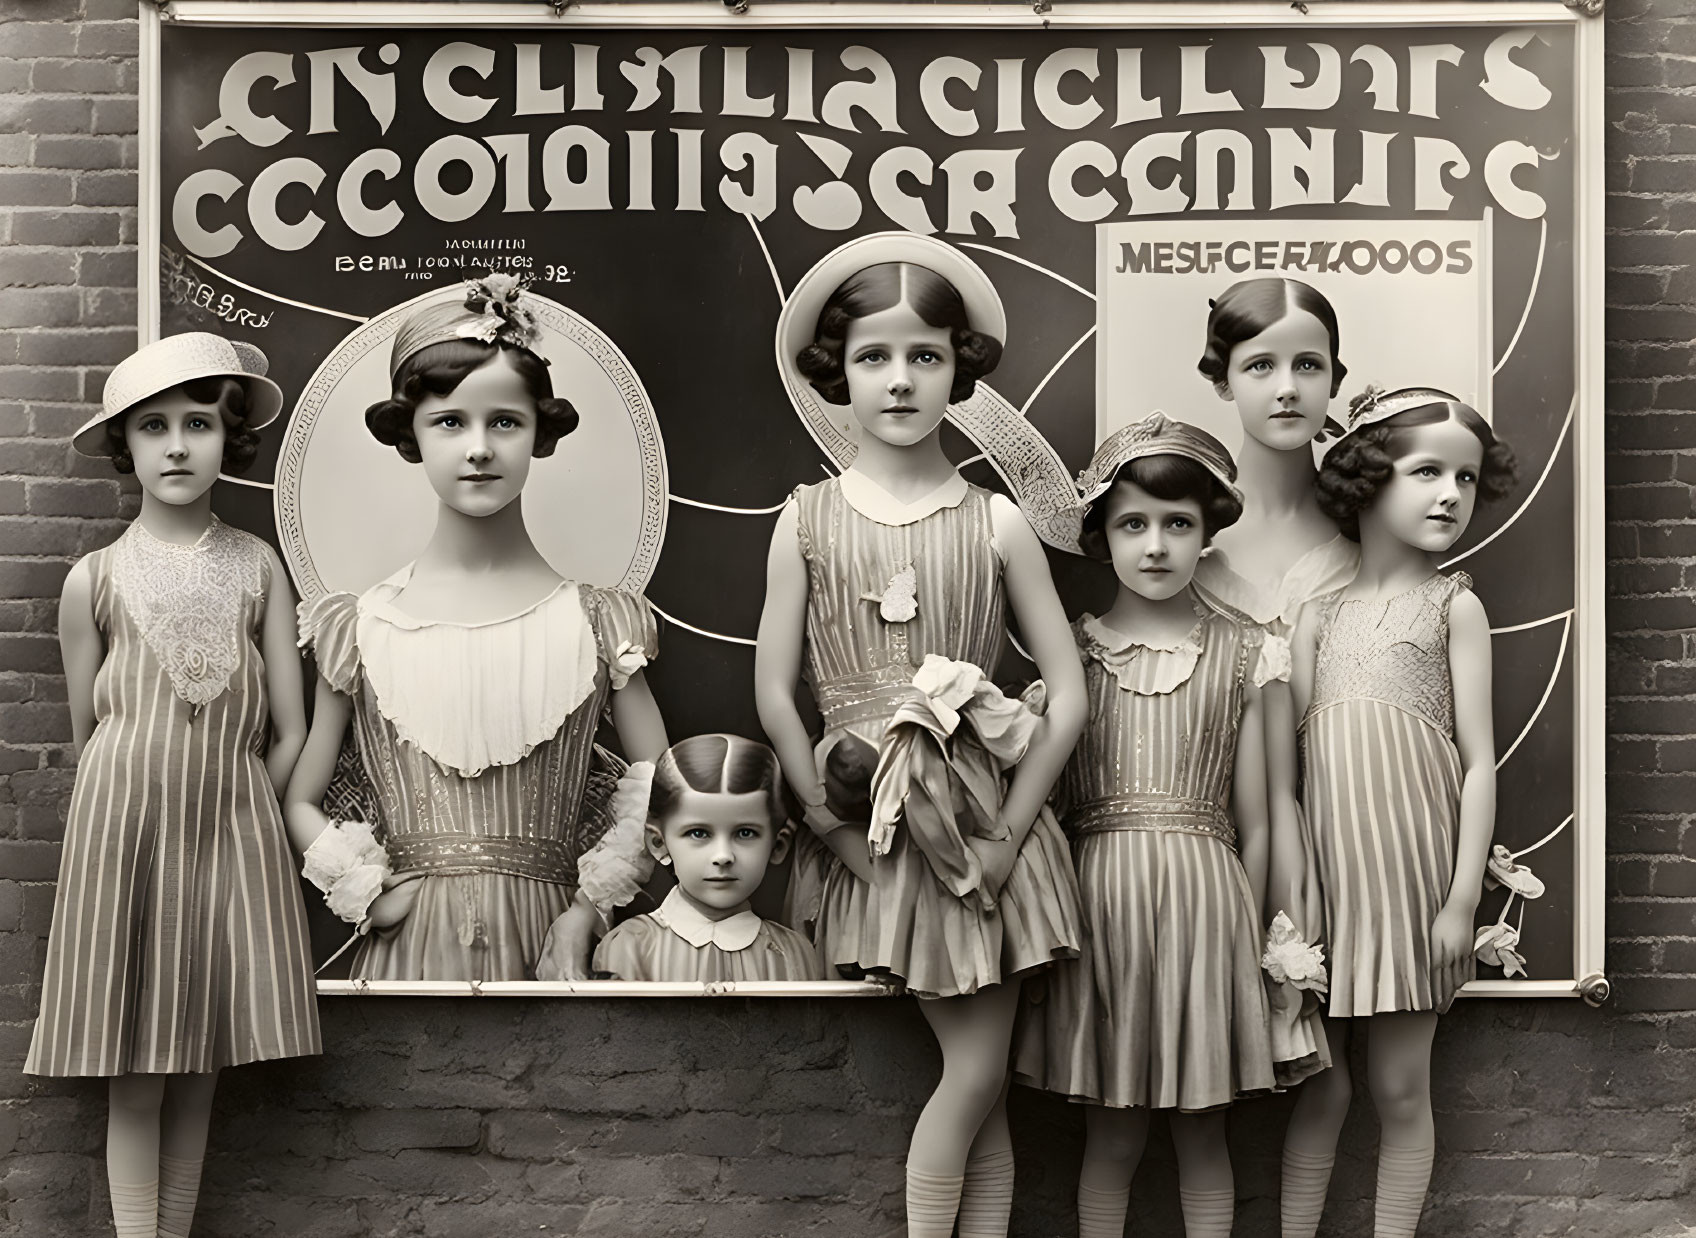 Six young girls in vintage clothing posing with alphabetic signs in nostalgic photo.